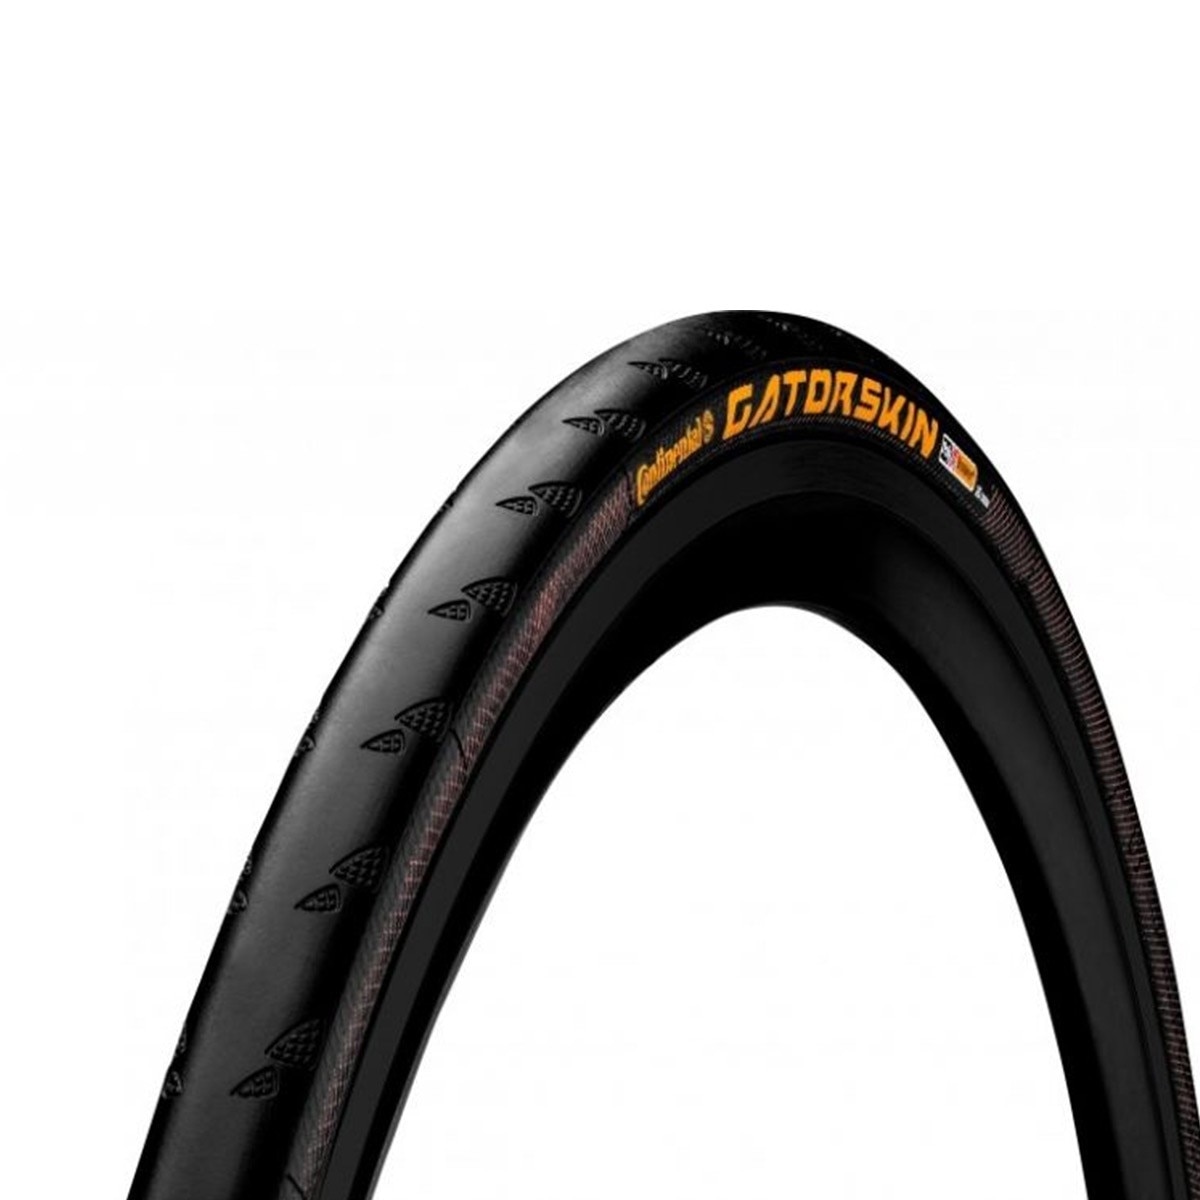 Image of Continental Gatorskin 700c Road Tire - Damaged Packaging